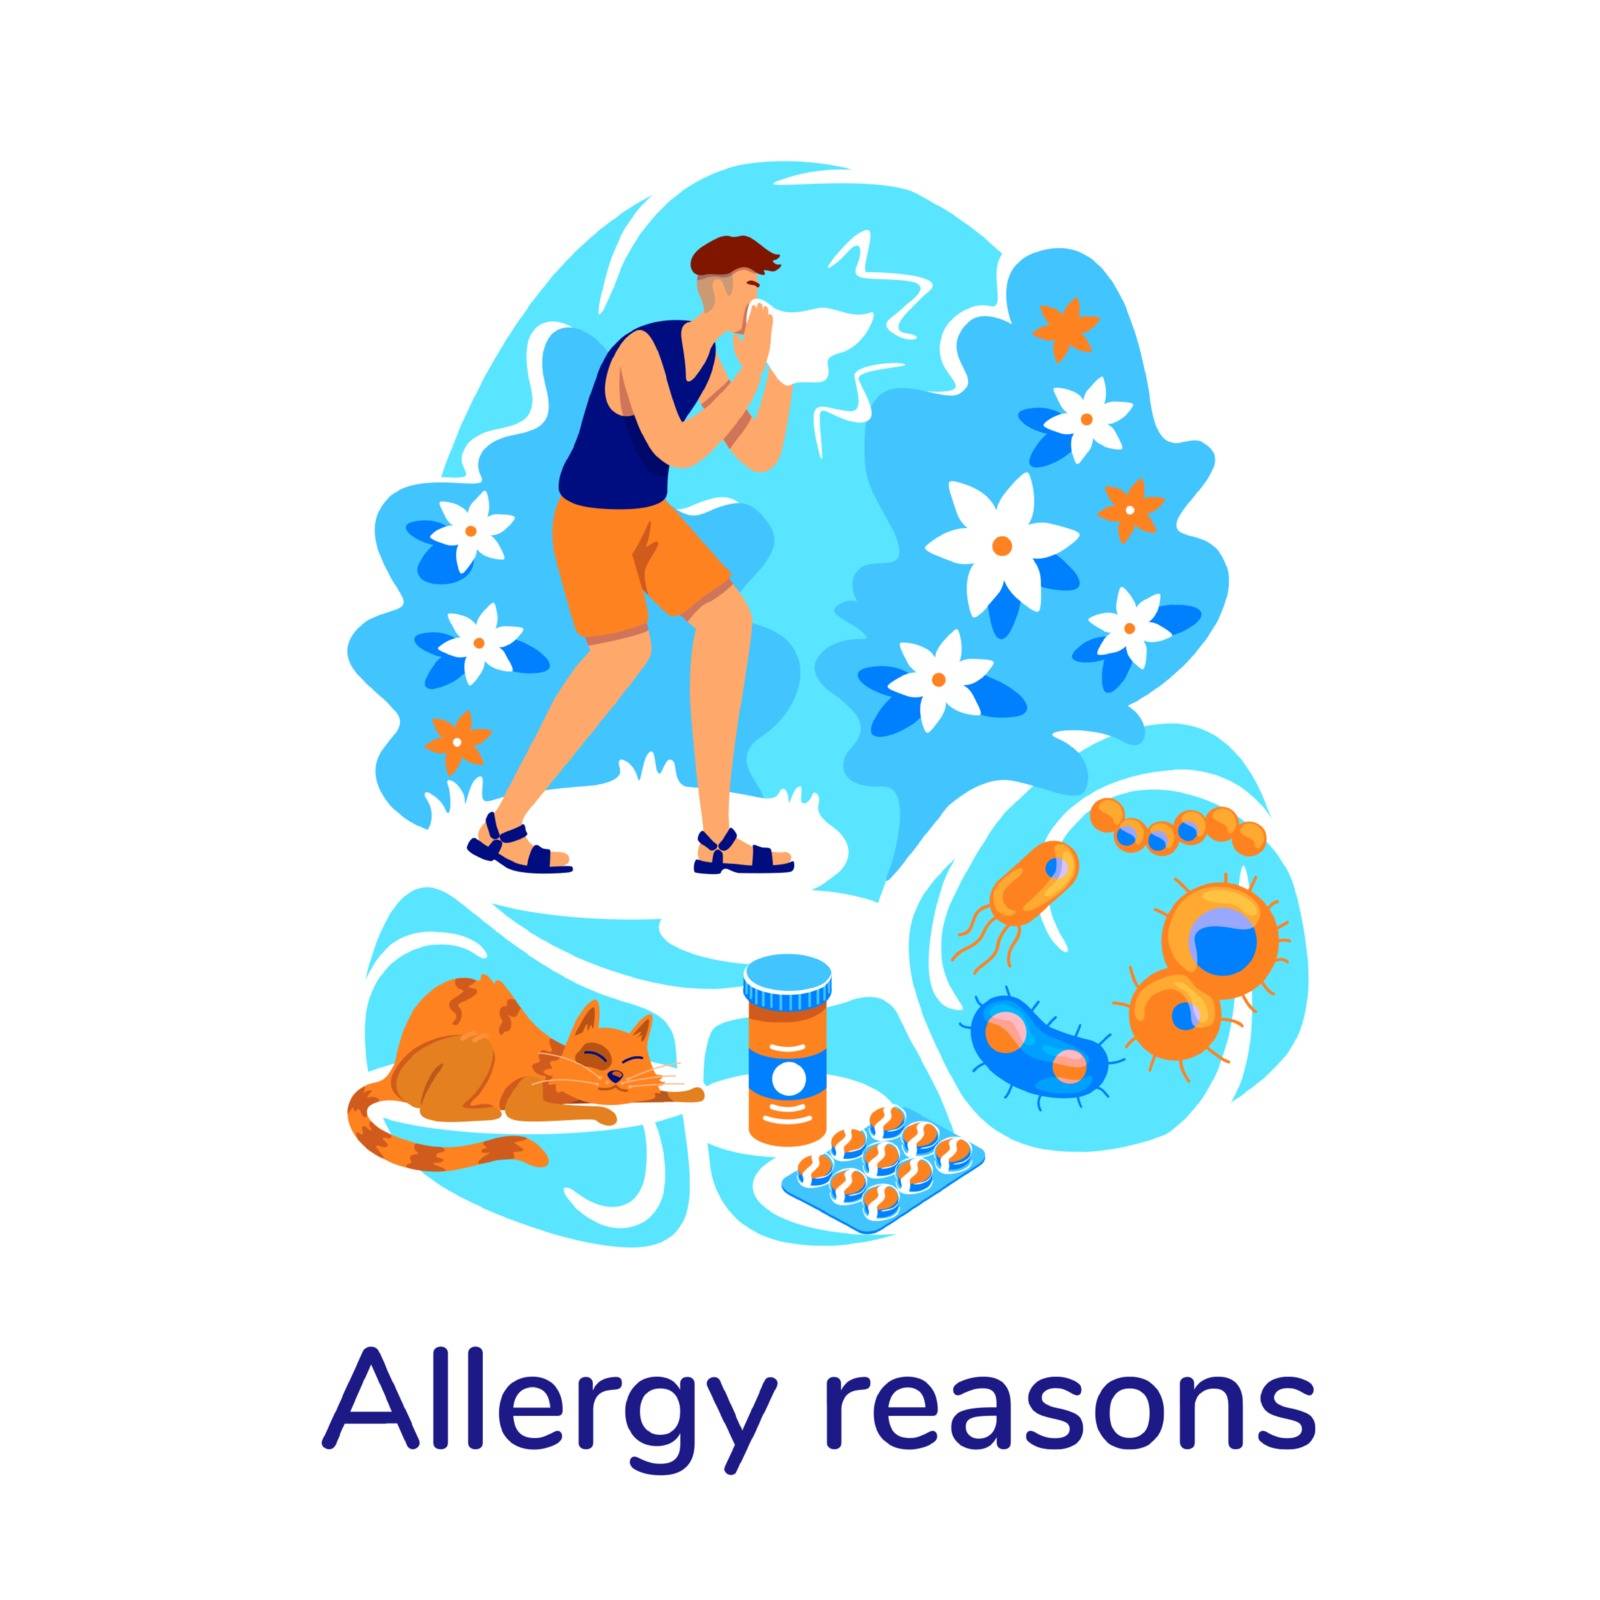 Respiratory problem flat concept vector illustration. Man unwell. Prescription for flu. Allergy reasons phrase. Man coughing 2D cartoon characters for web design. Healthcare treatment creative idea